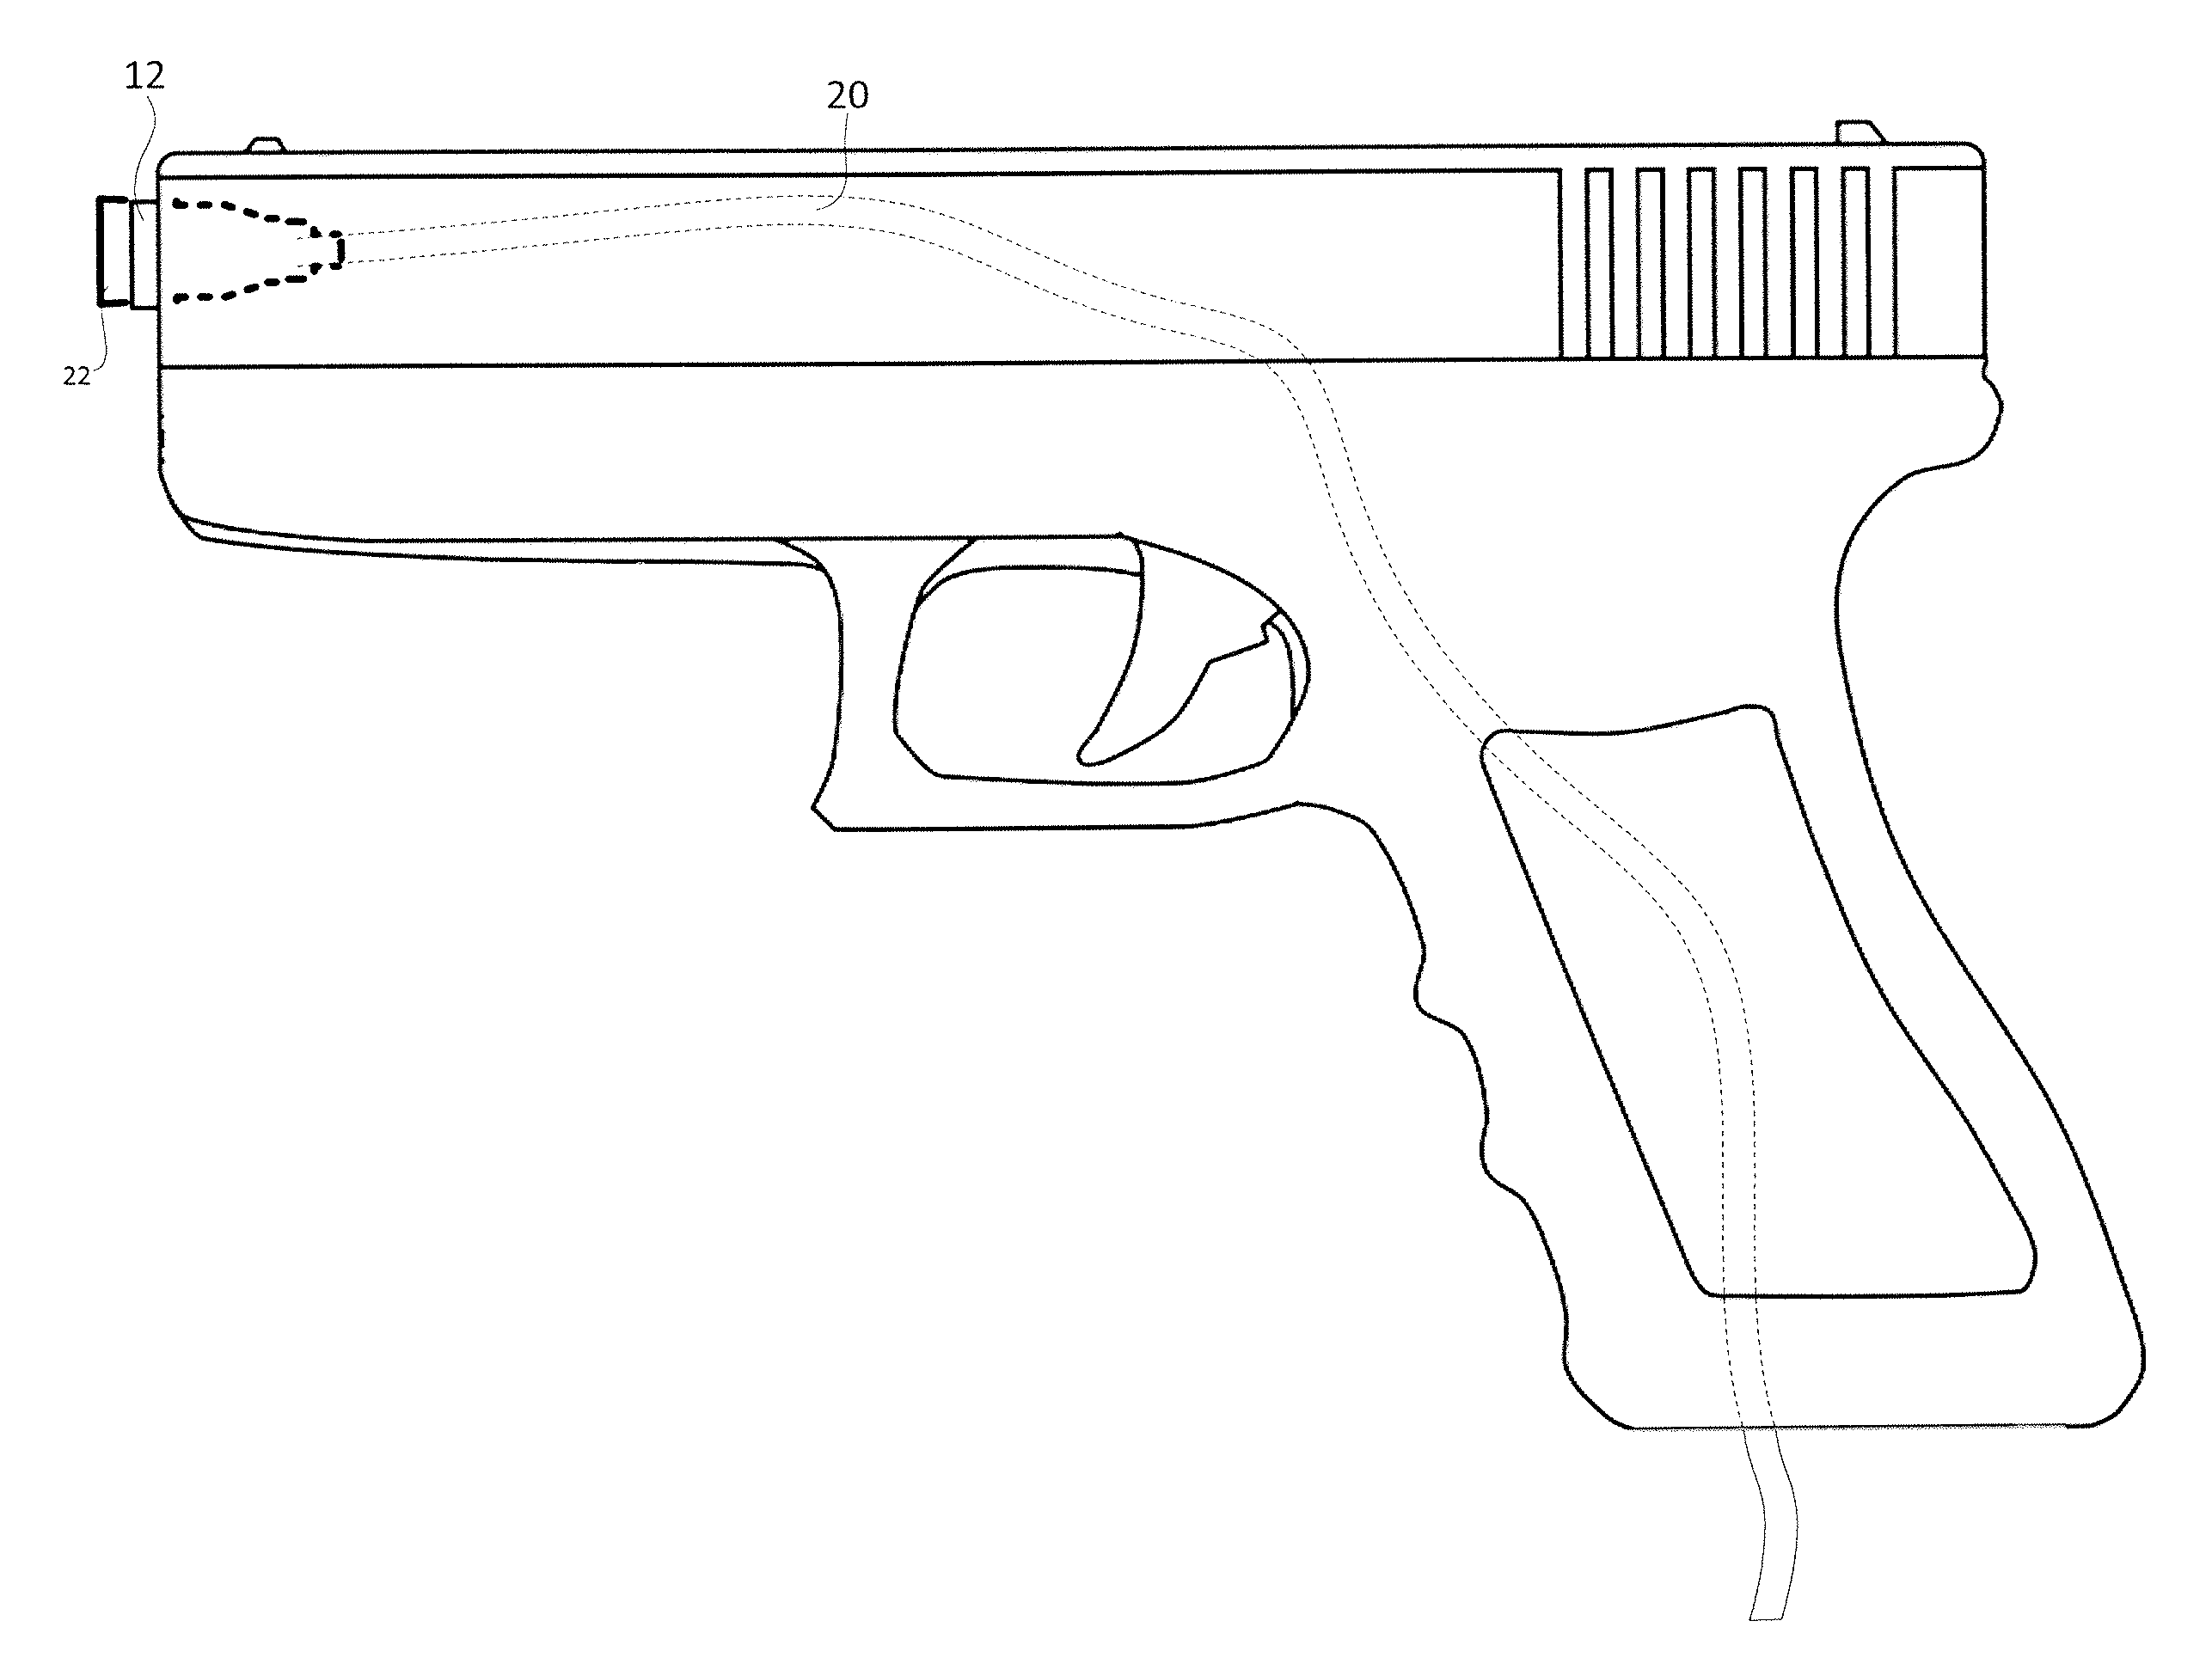 Firearm safety and chamber block indicator